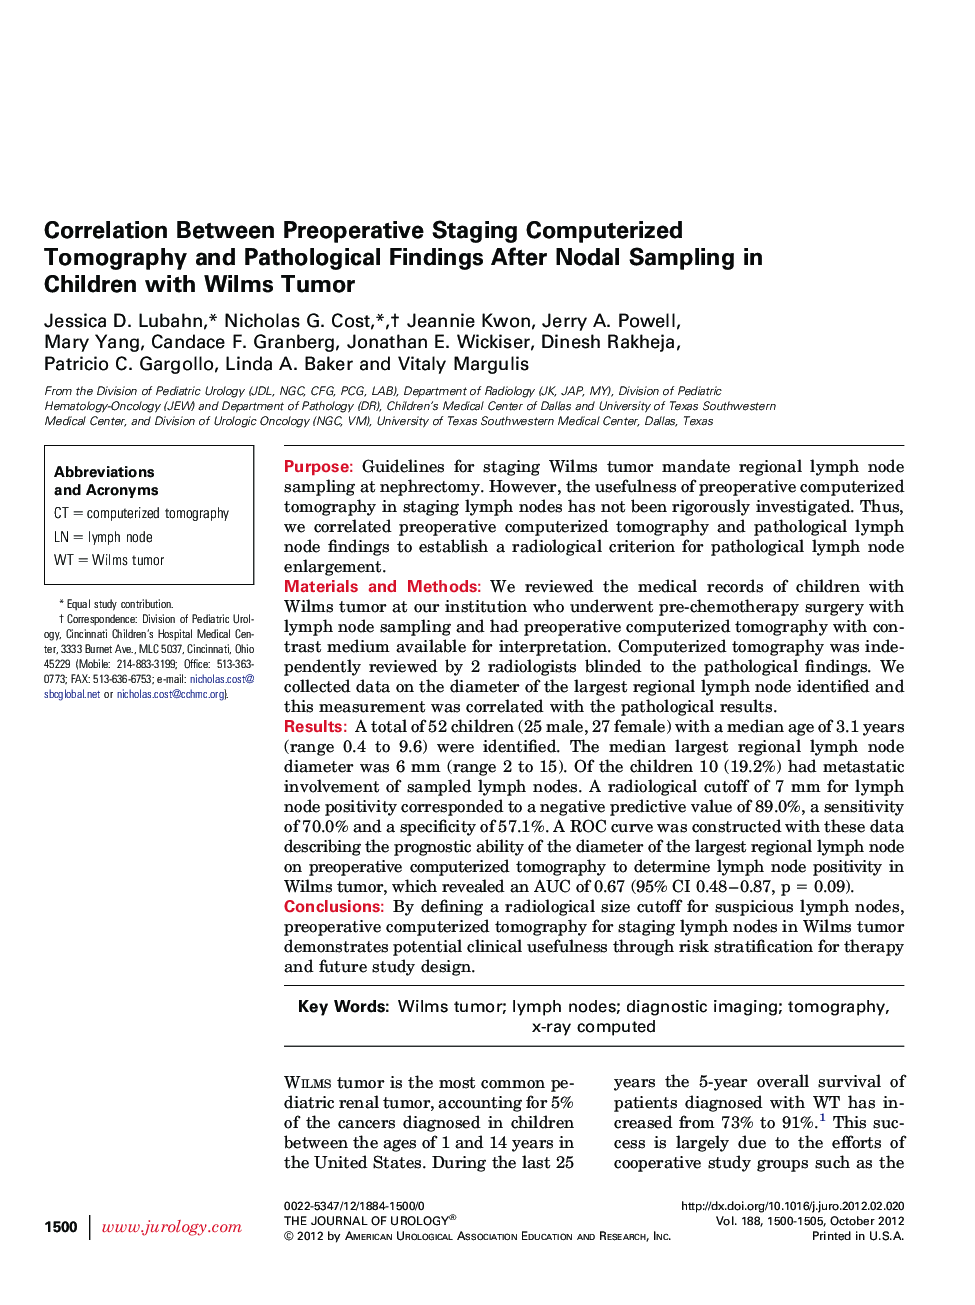 Correlation Between Preoperative Staging Computerized Tomography and Pathological Findings After Nodal Sampling in Children with Wilms Tumor